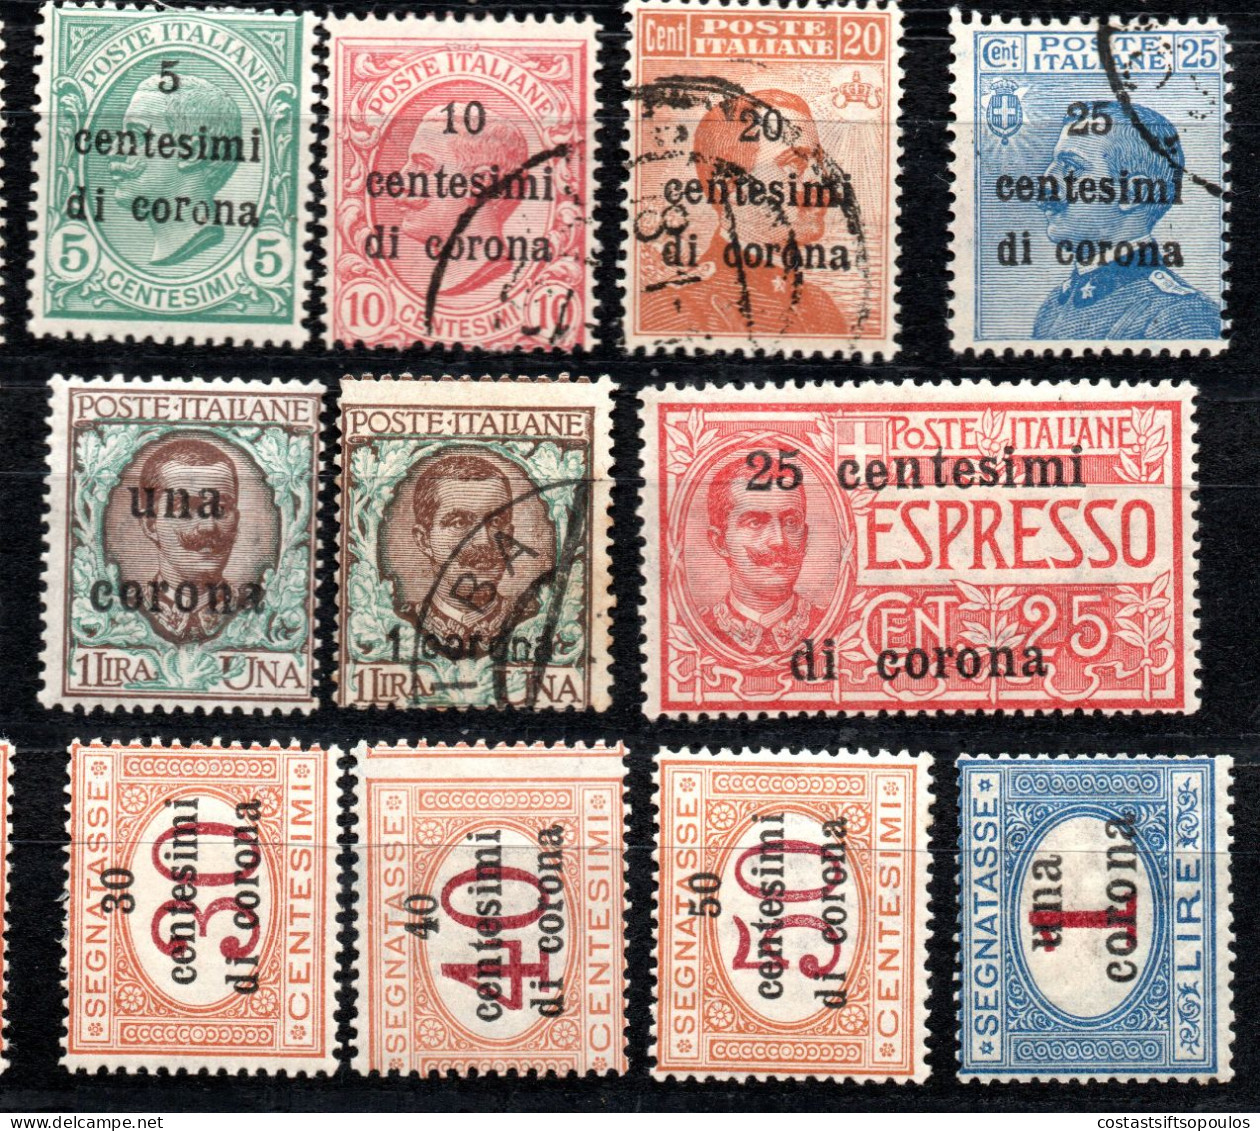 2145.AUSTRIA. ITALY. TRENTINO 1919-1920 41 ST. LOT.POSSIBLY SOME NOT GENUINE. GENERALLY GOOD CONDITION - Occ. Autrichienne